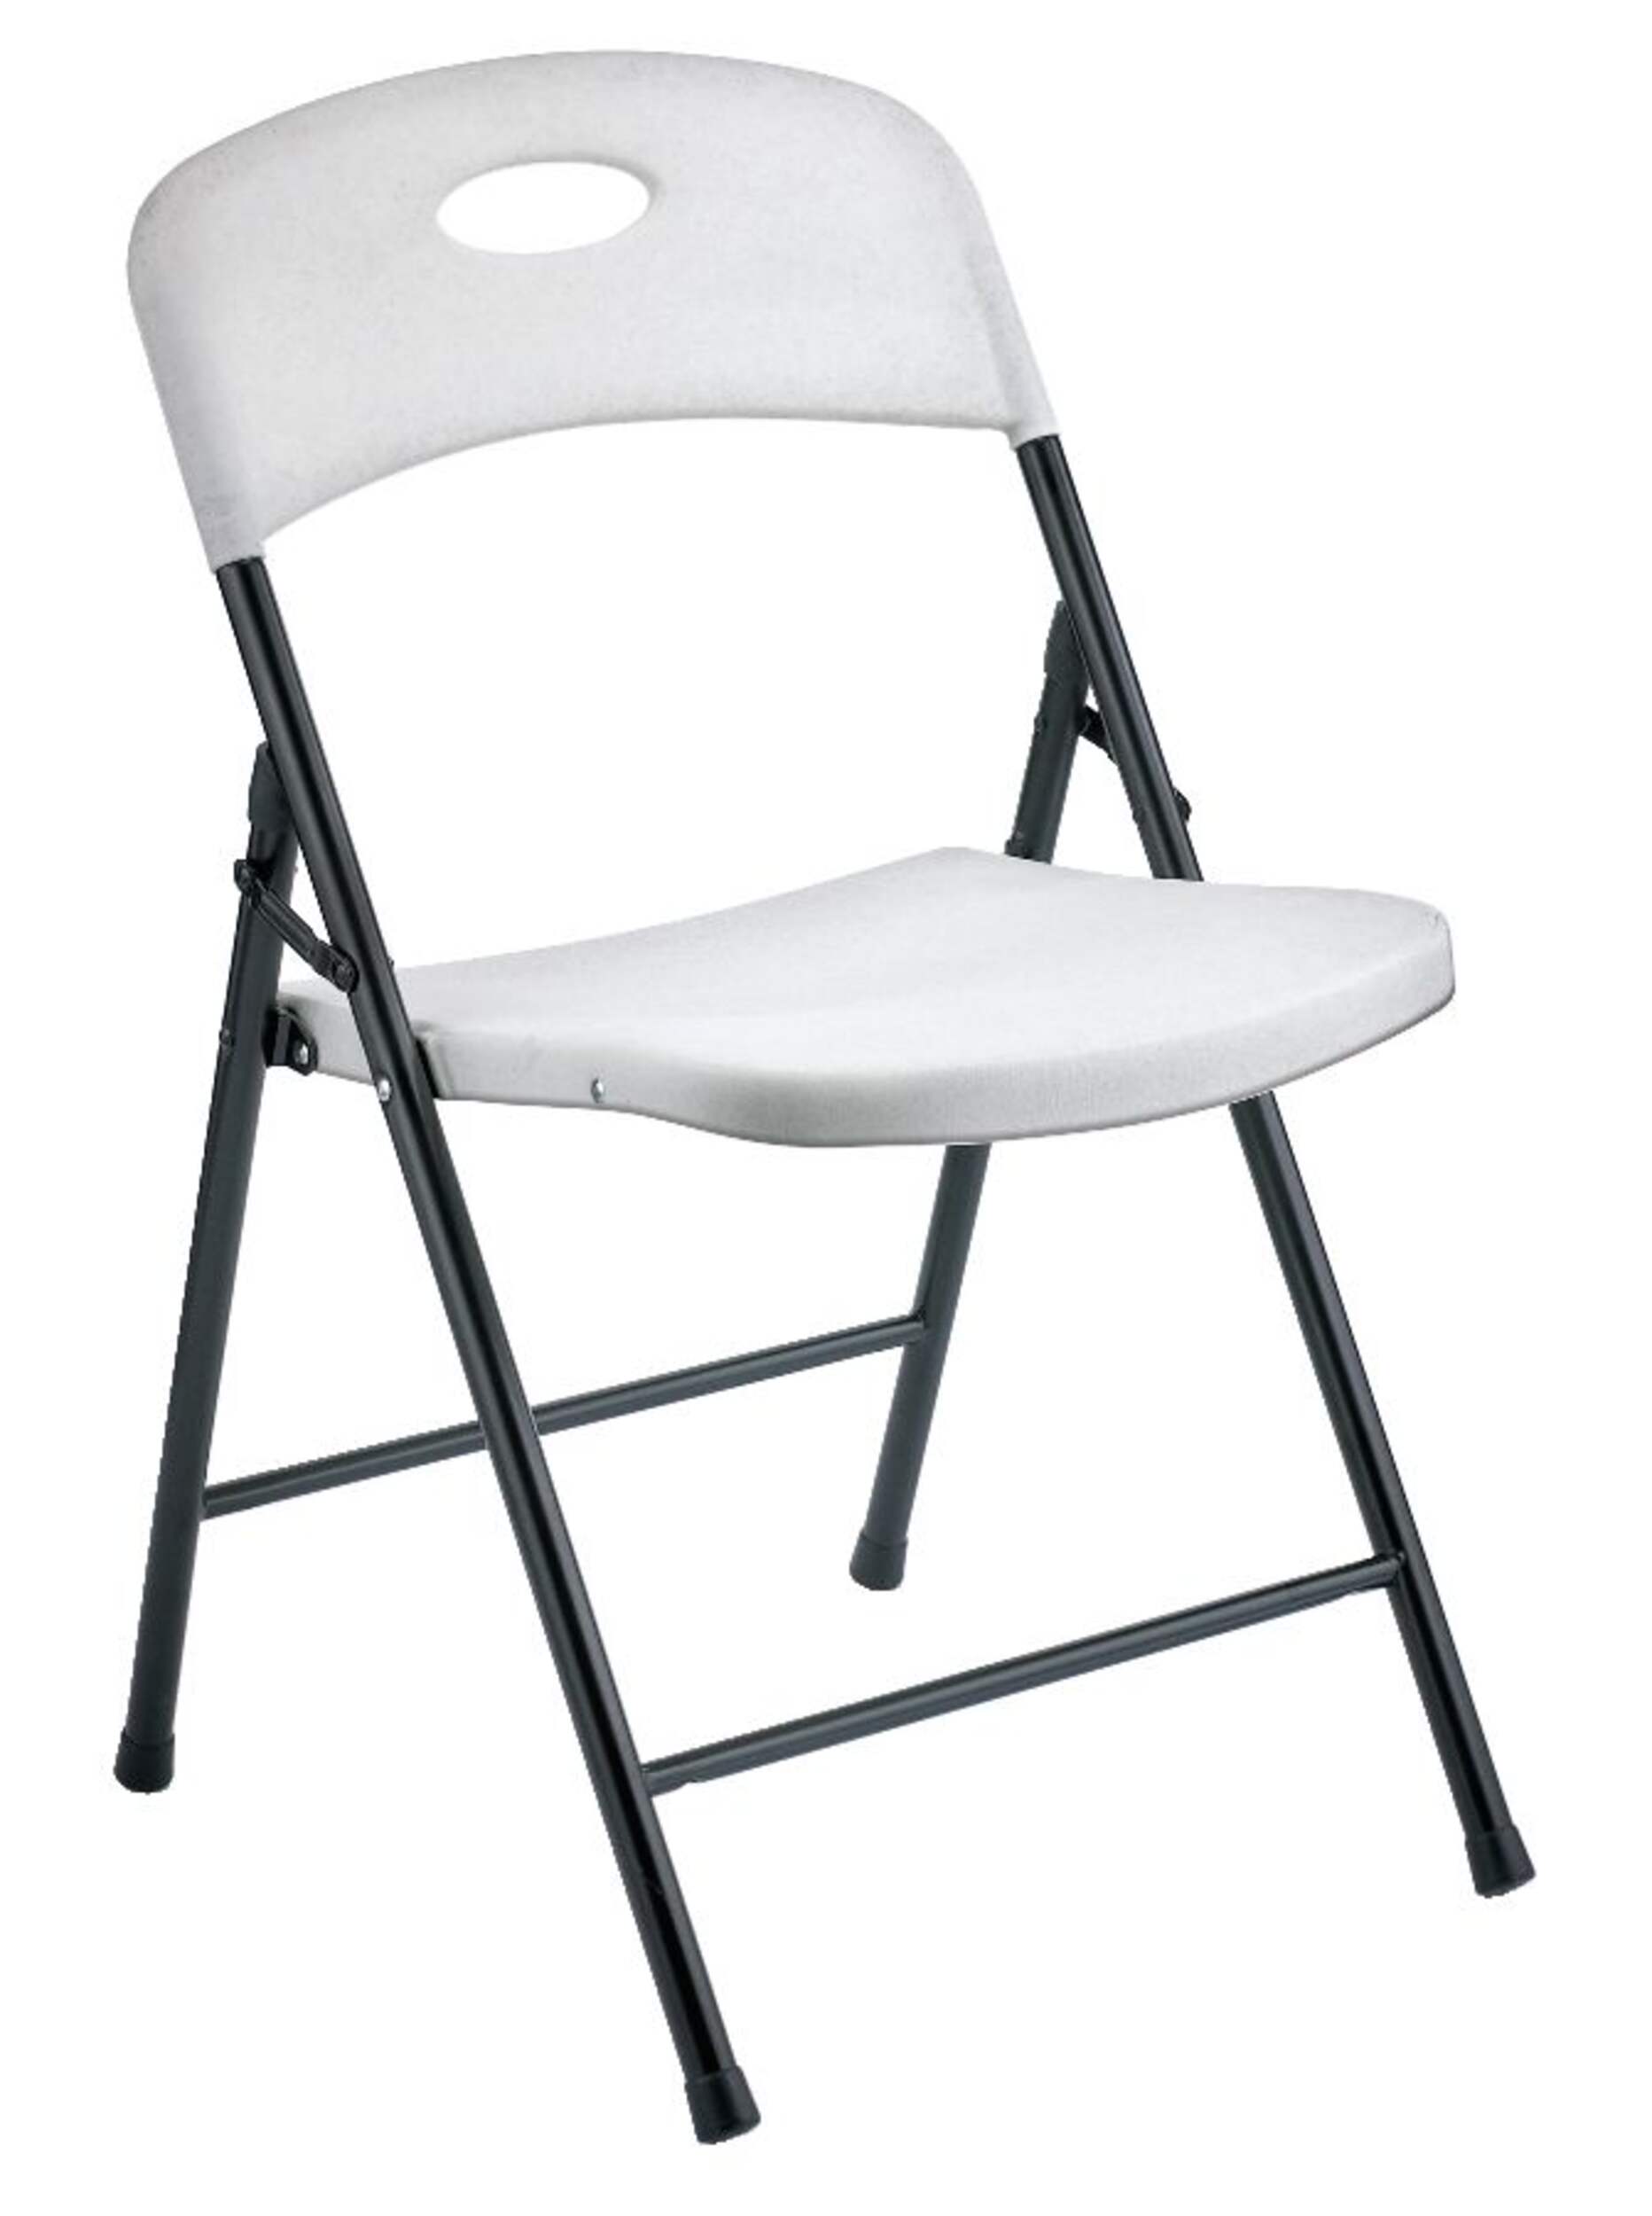 For Living Resin Folding Chair White  316ea4f4 Fdb7 4458 81e2 Ae2d02173bc5 Jpgrendition ?imdensity=1&imwidth=640&impolicy=gZoom